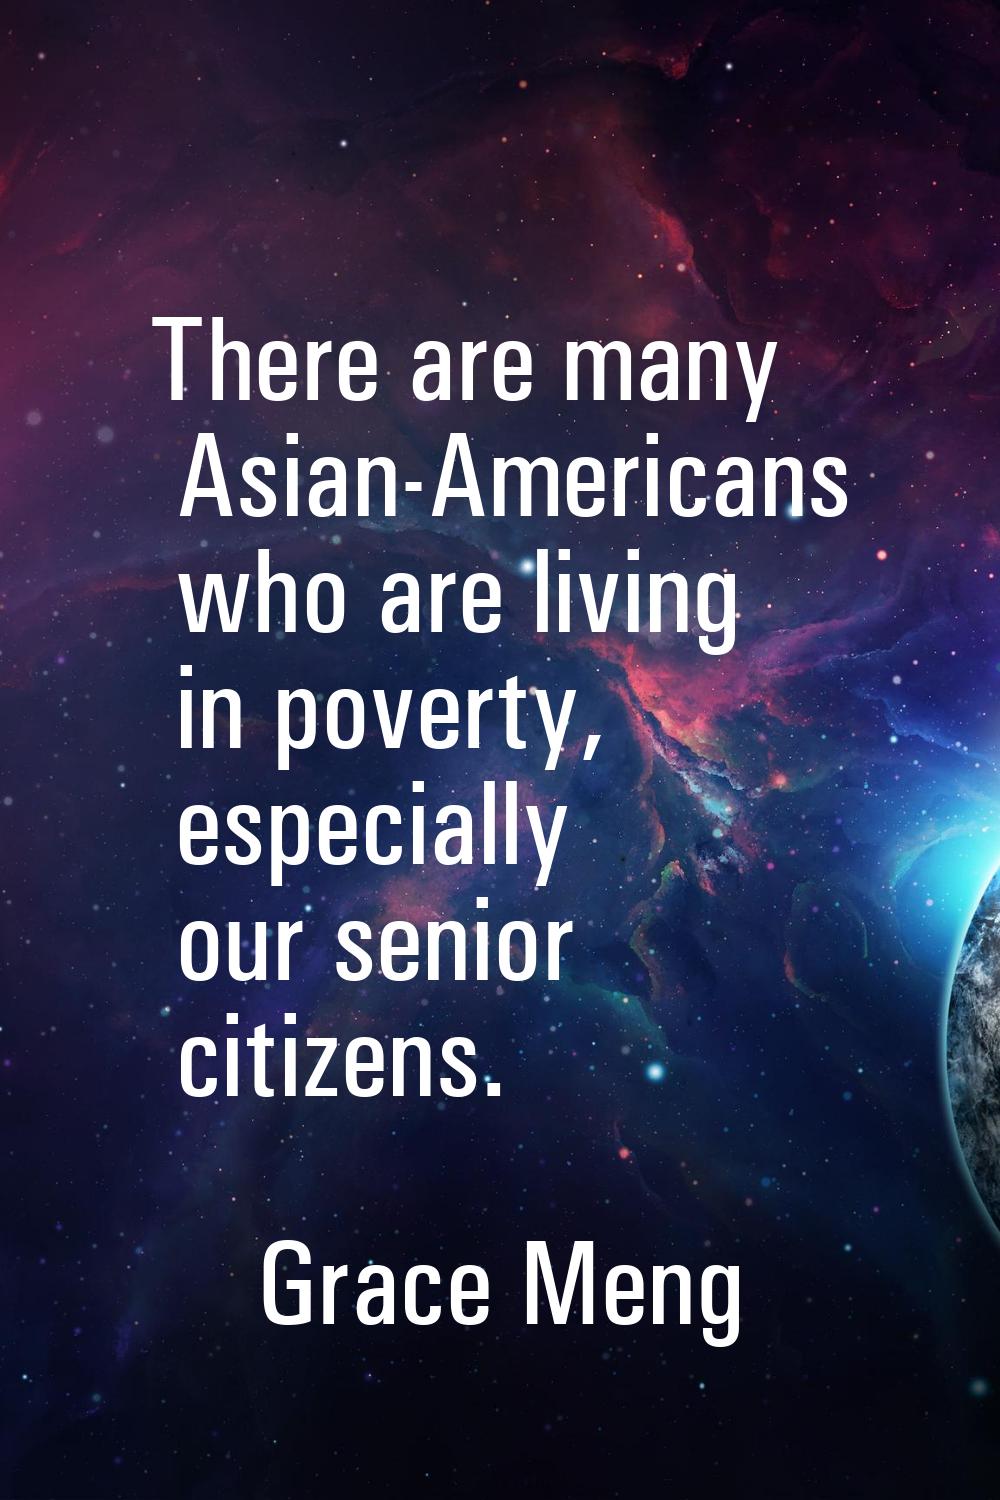 There are many Asian-Americans who are living in poverty, especially our senior citizens.